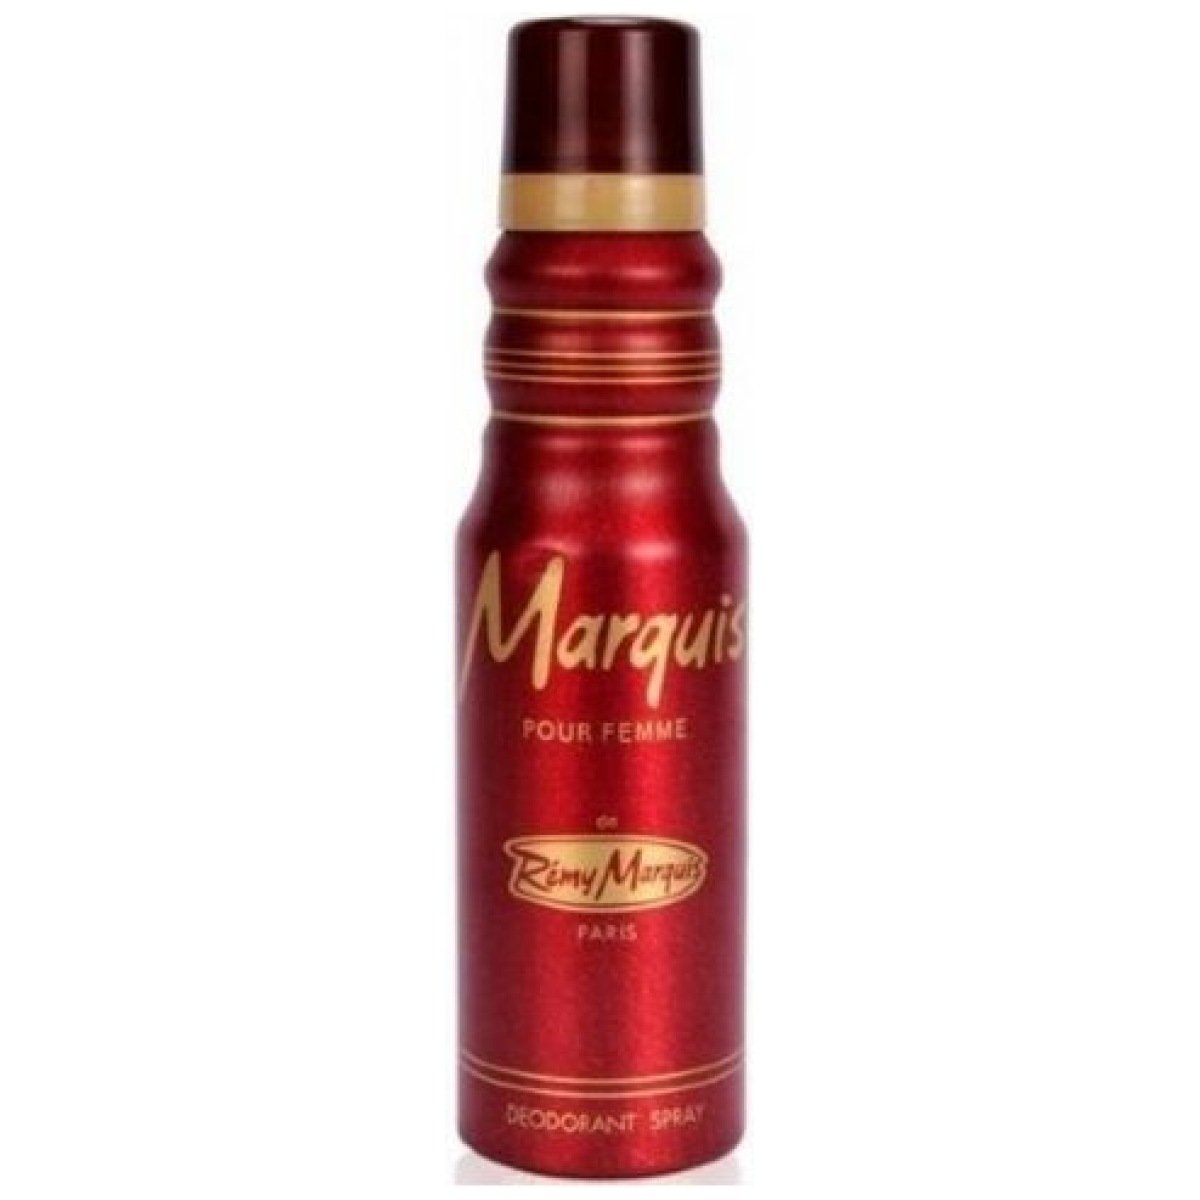 Remy Marquis Deodorant For Men 175ml